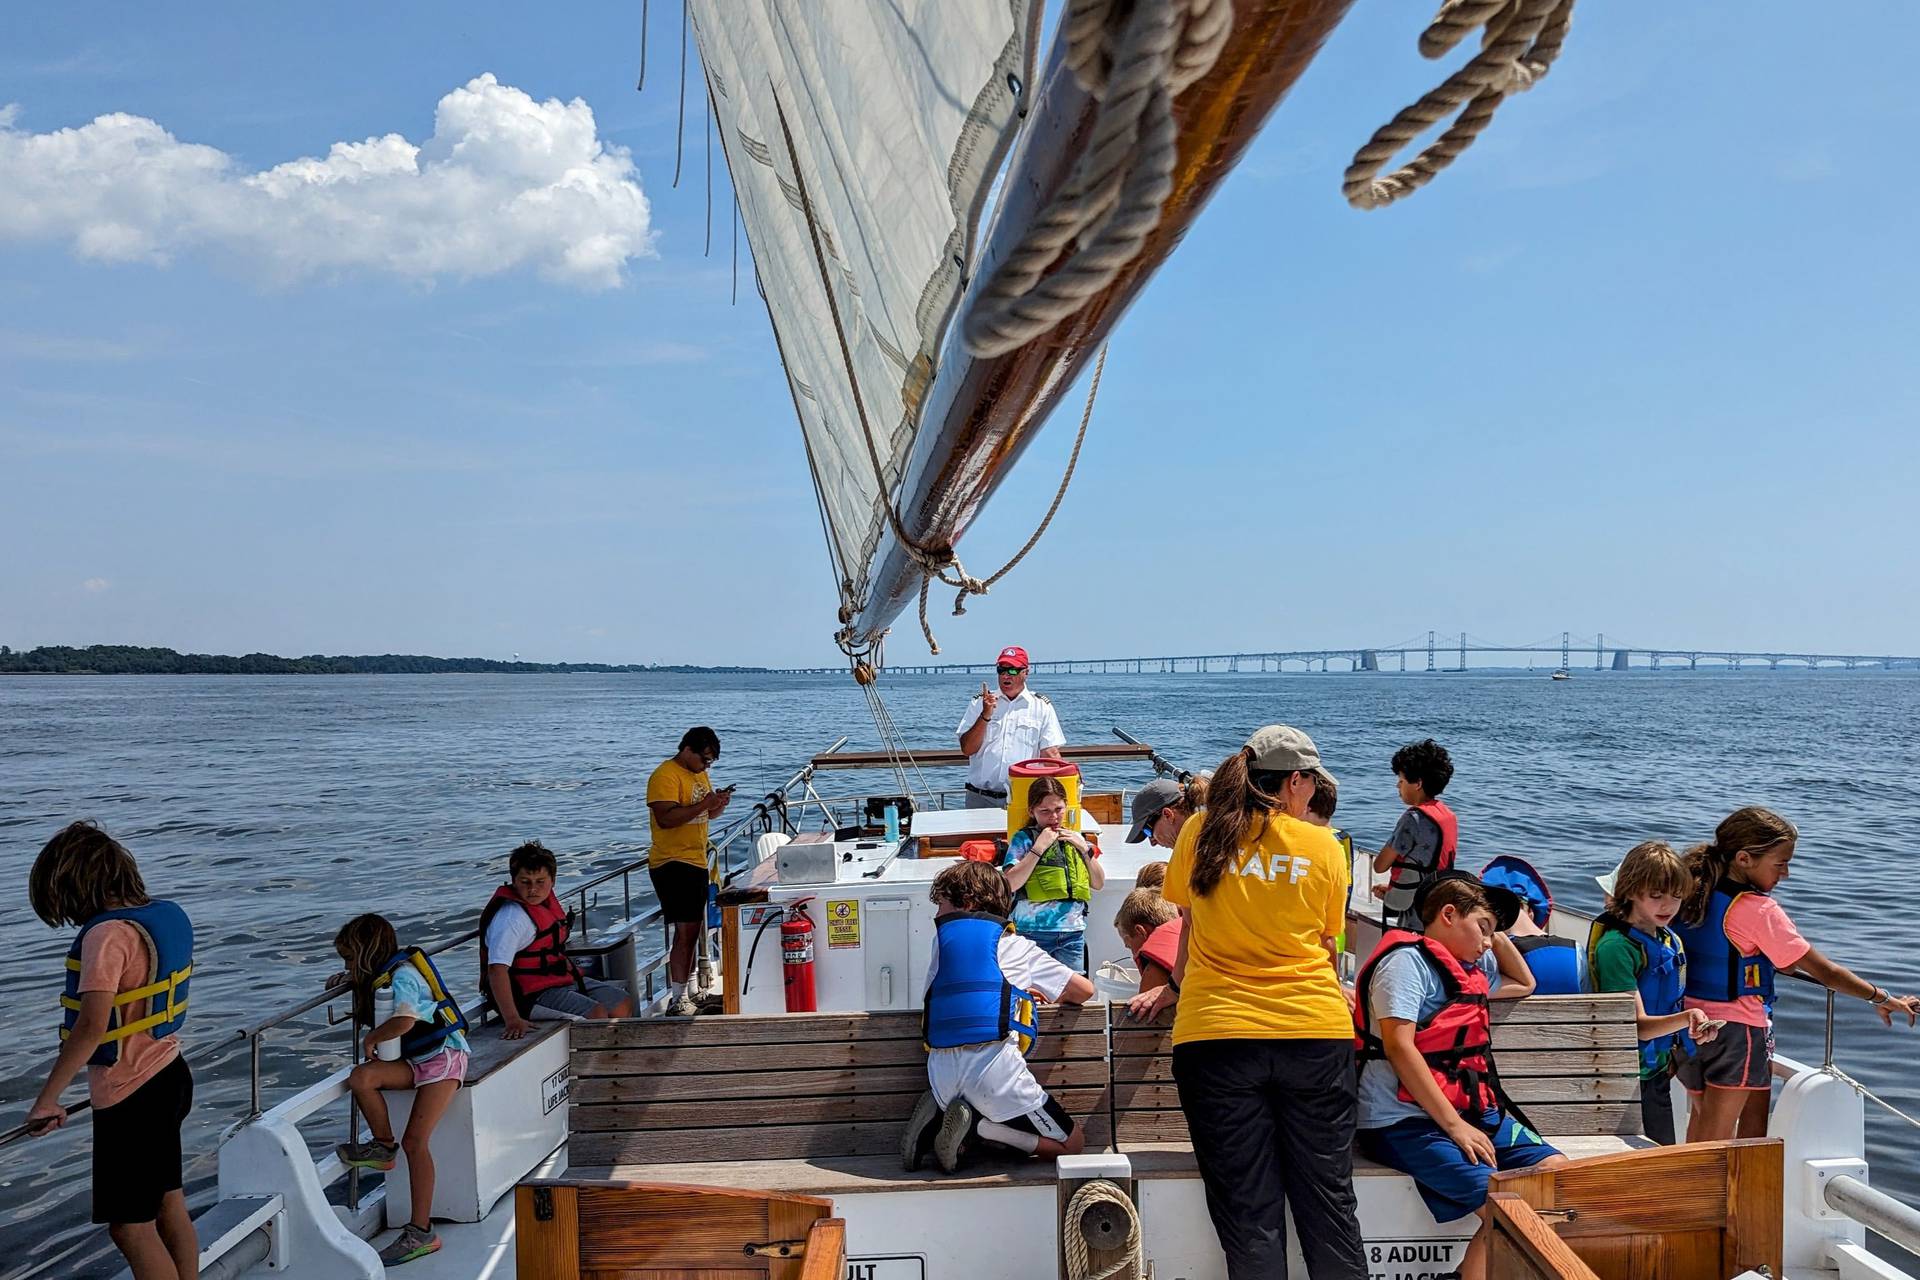 Capt. Rick Flamand talks to summer campers aboard the Wilma Lee, an 80-year-old skipjack, during a morning cruise out of Annapolis.